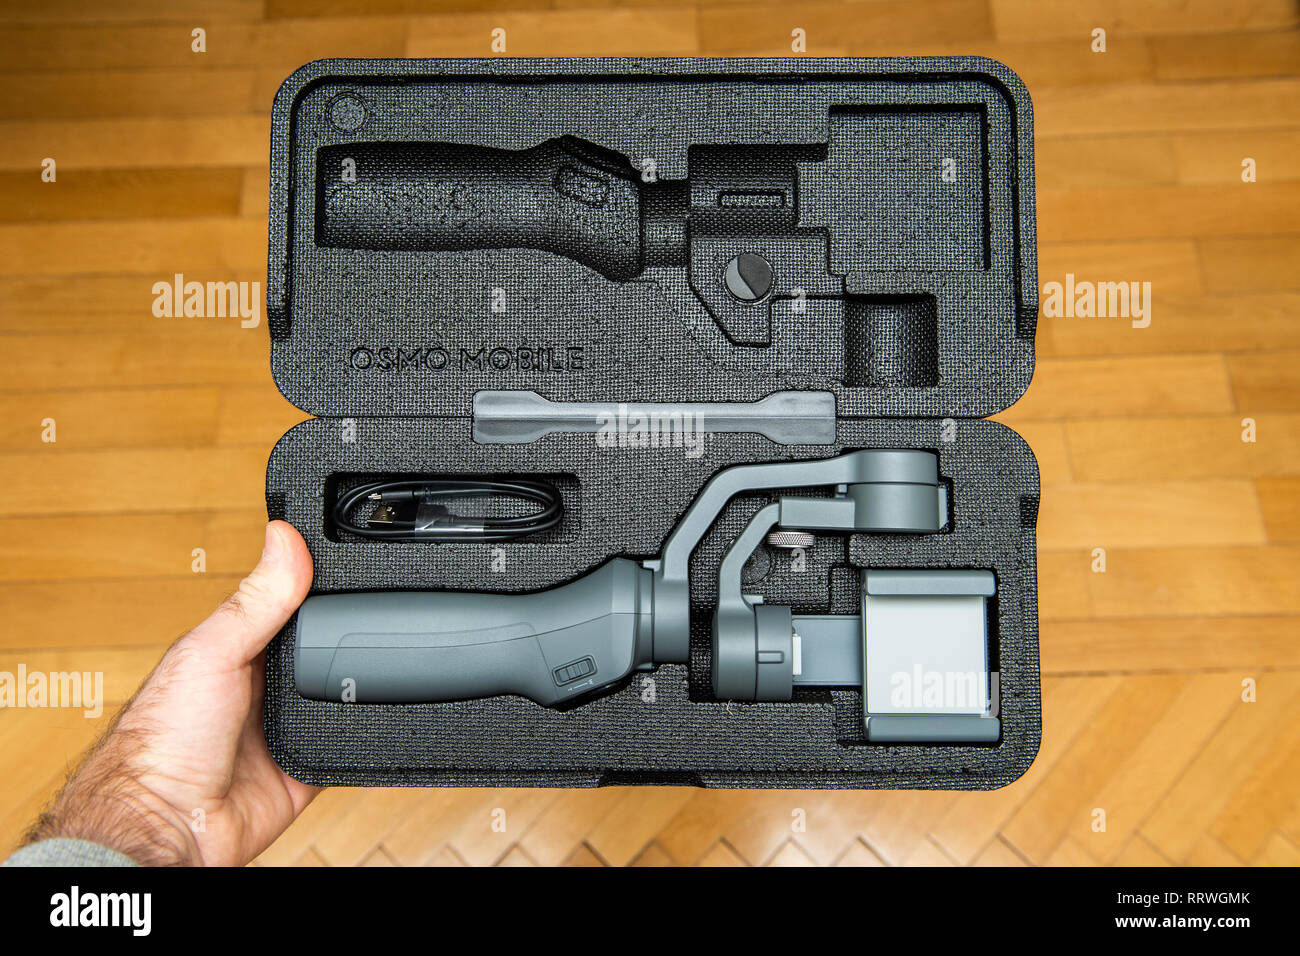 PARIS, FRANCE - NOV 22, 2018: Man unboxing new DJI Osmo Mobile 2 Smartphone Gimbal manufactured by the SZ DJI Technology Co., Ltd company holding the foam packaging above the wooden floor Stock Photo